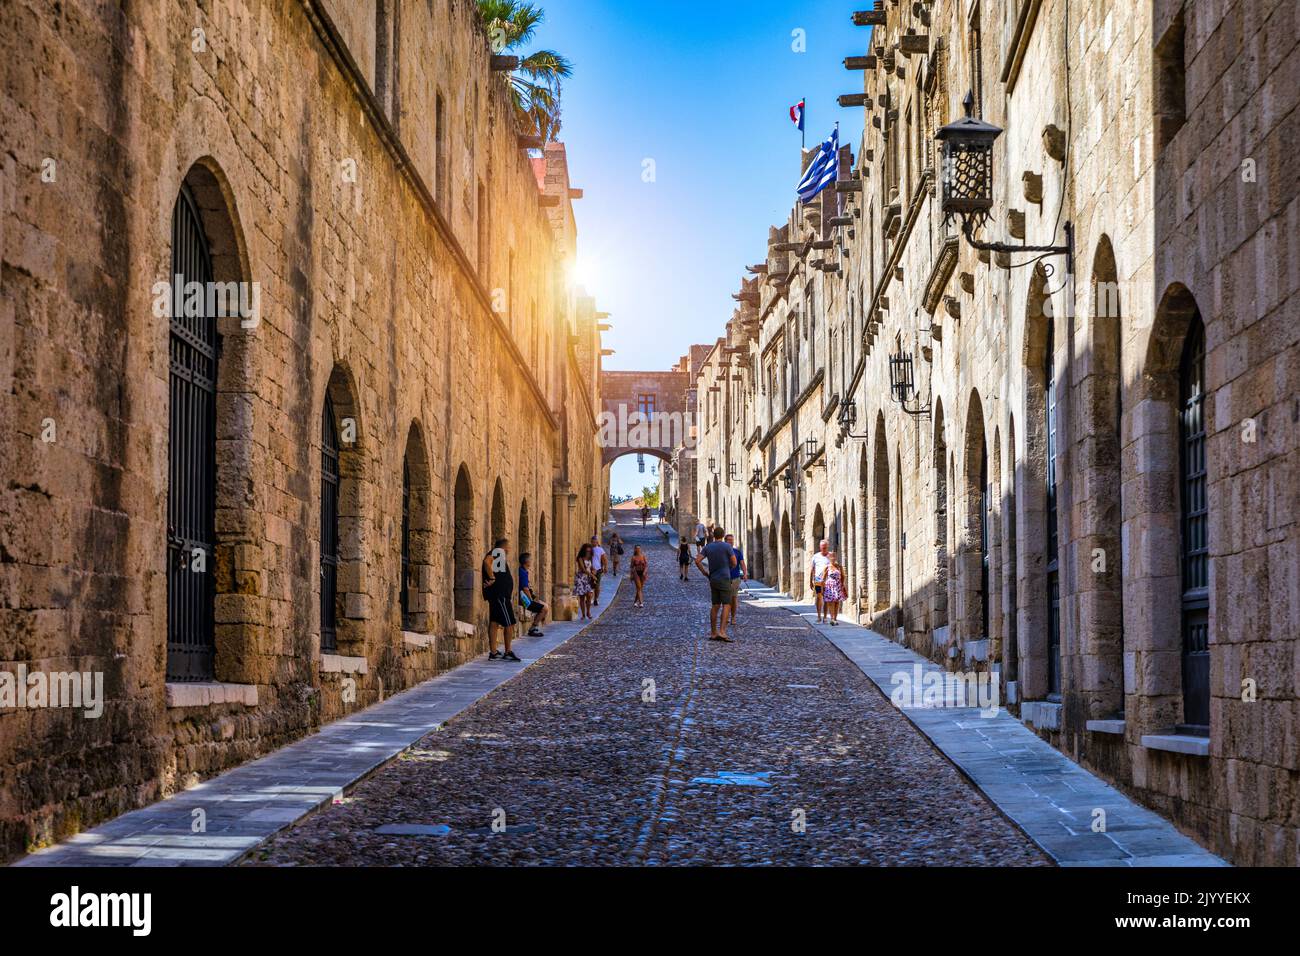 The Street of the Knights, the most famous street in Rhodes old town, Rhodes island, Greece. The Street of the Knights in Rhodes is one of the best pr Stock Photo